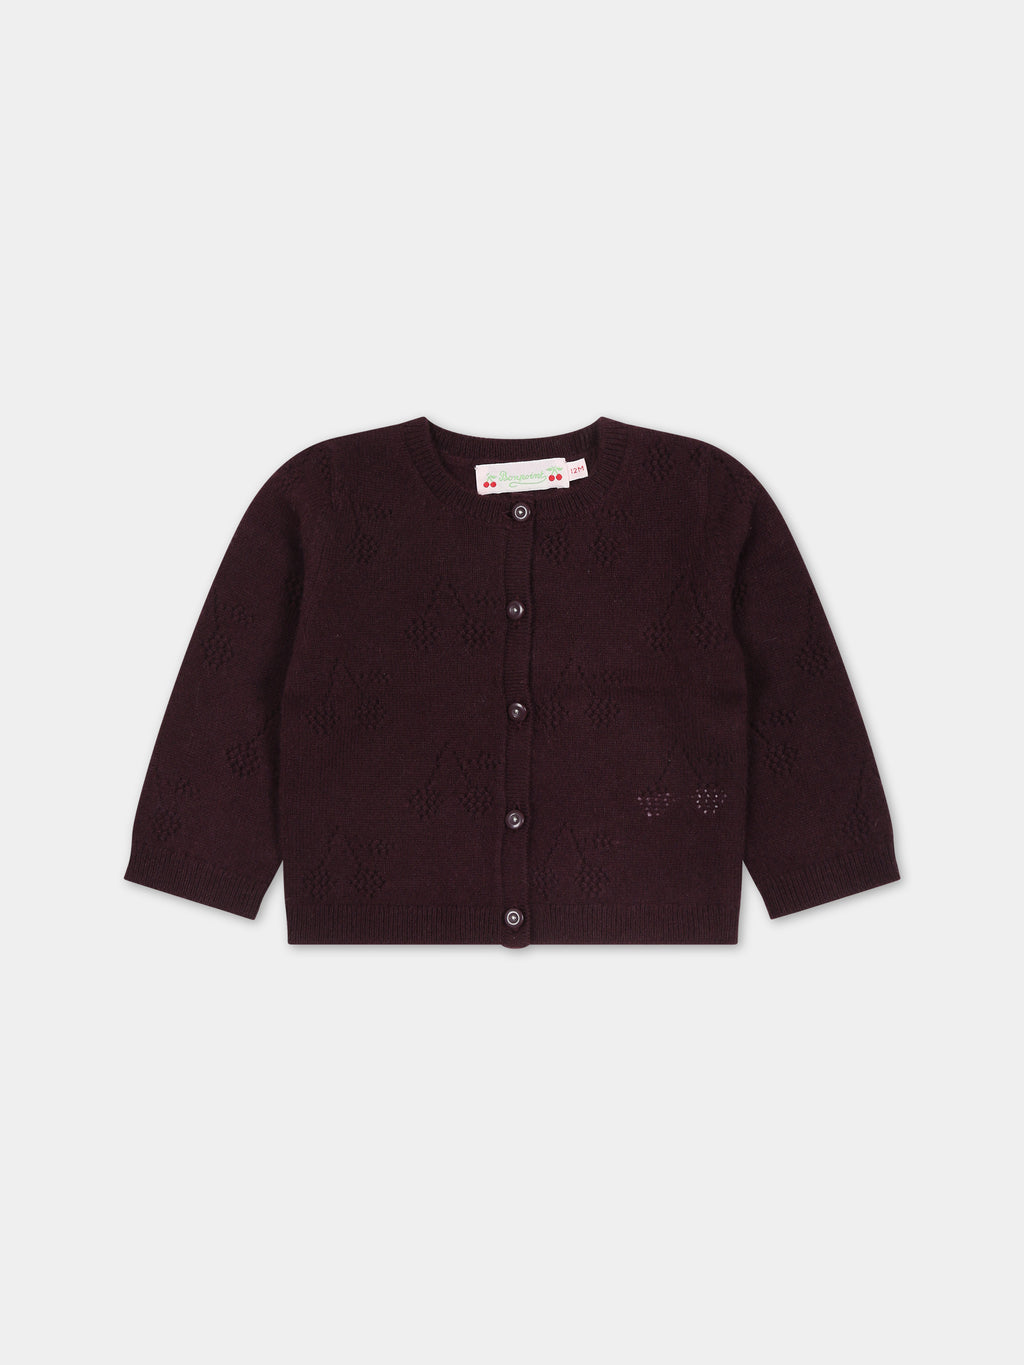 Burgundy cardigan for baby girl with cherries